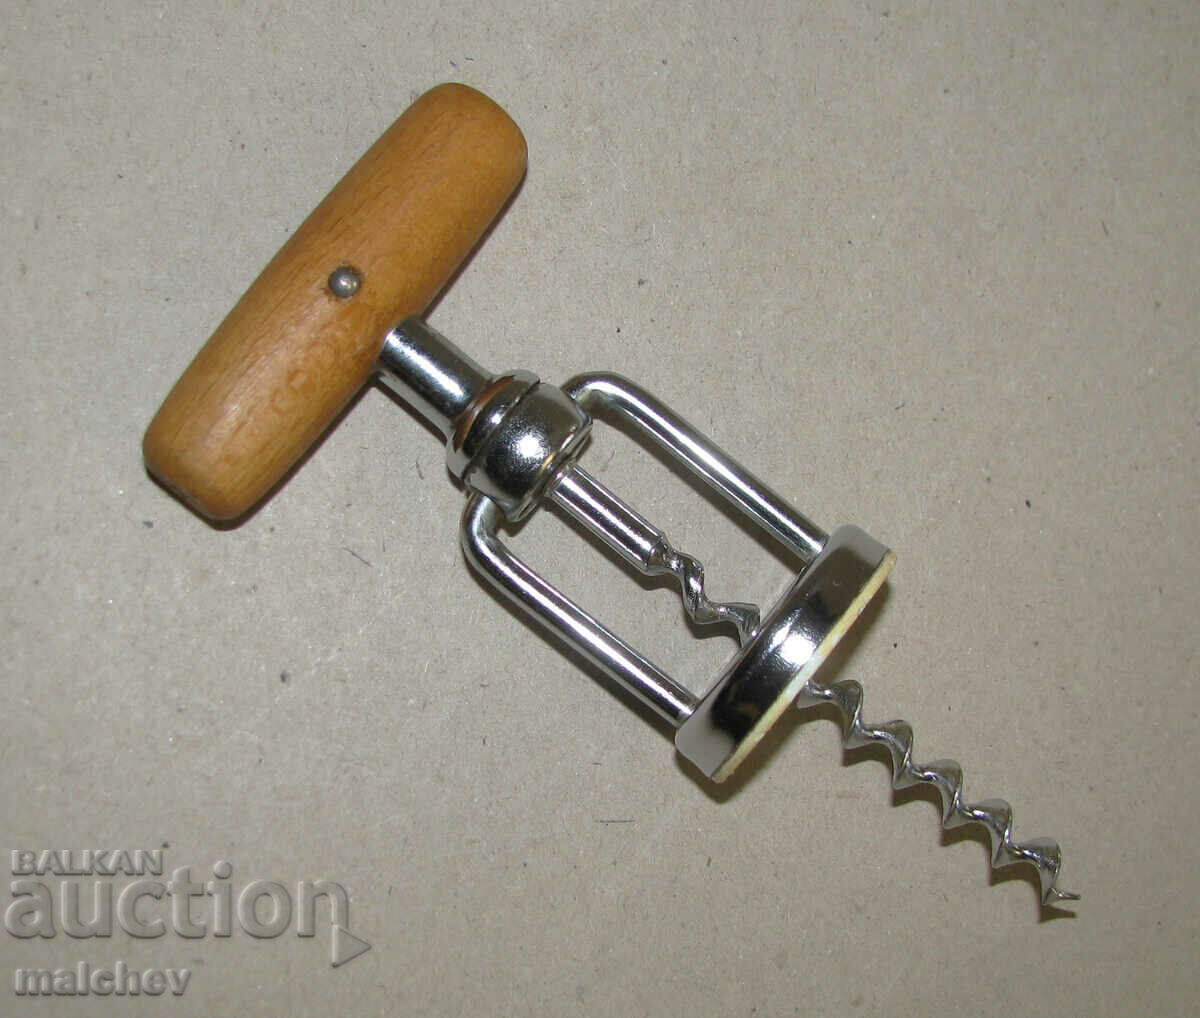 Corkscrew with wooden handle, preserved